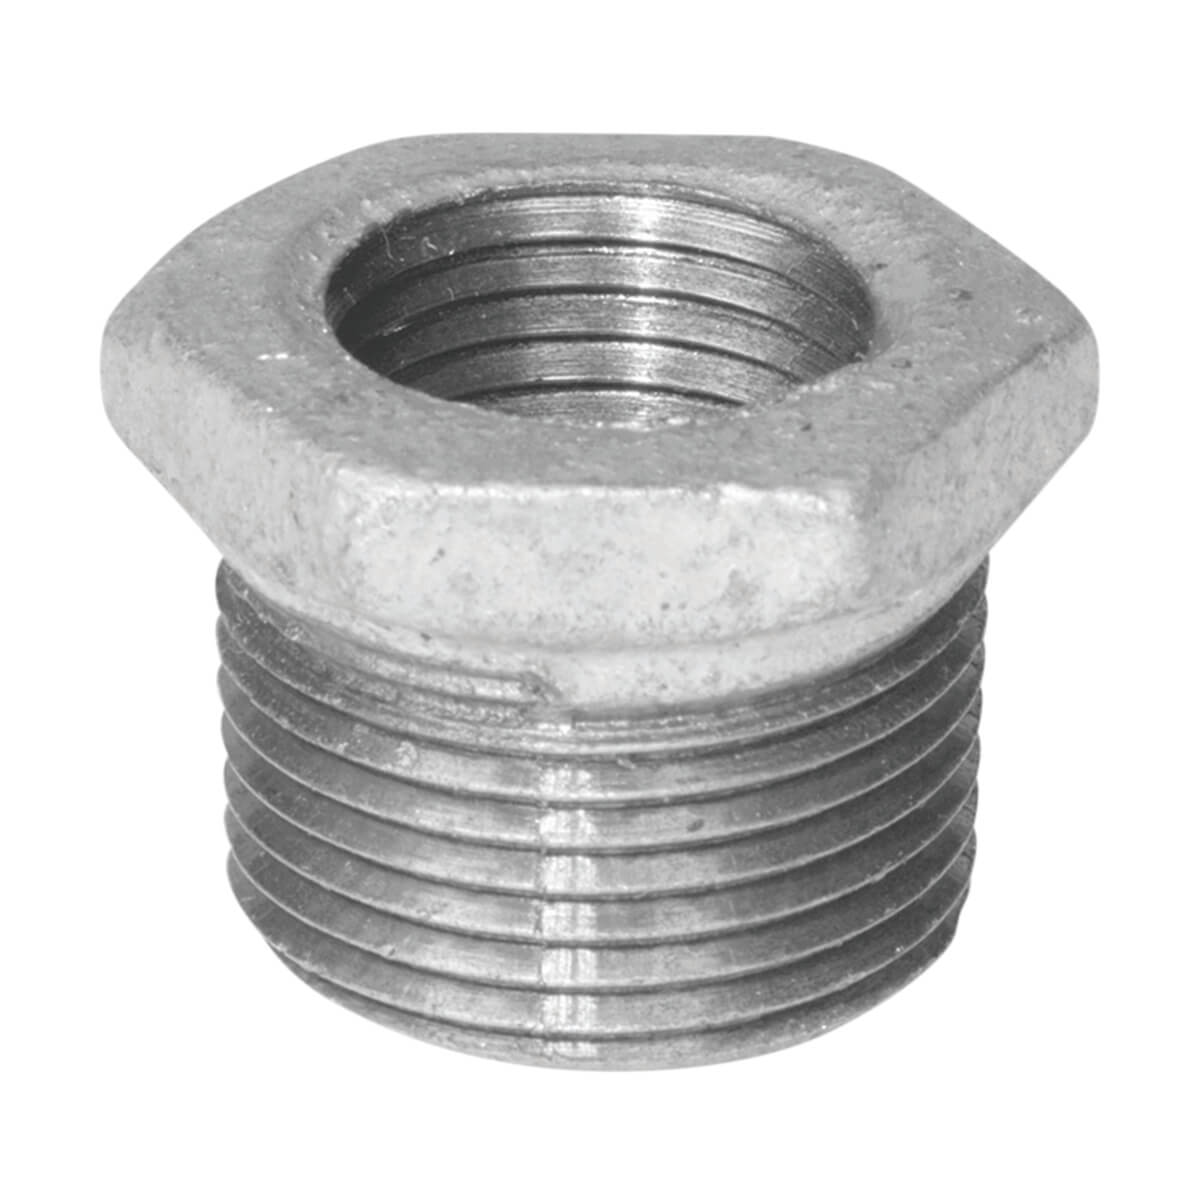 Fitting Galvanized Iron Hex Bushing - 2-1/2-in x 2-in